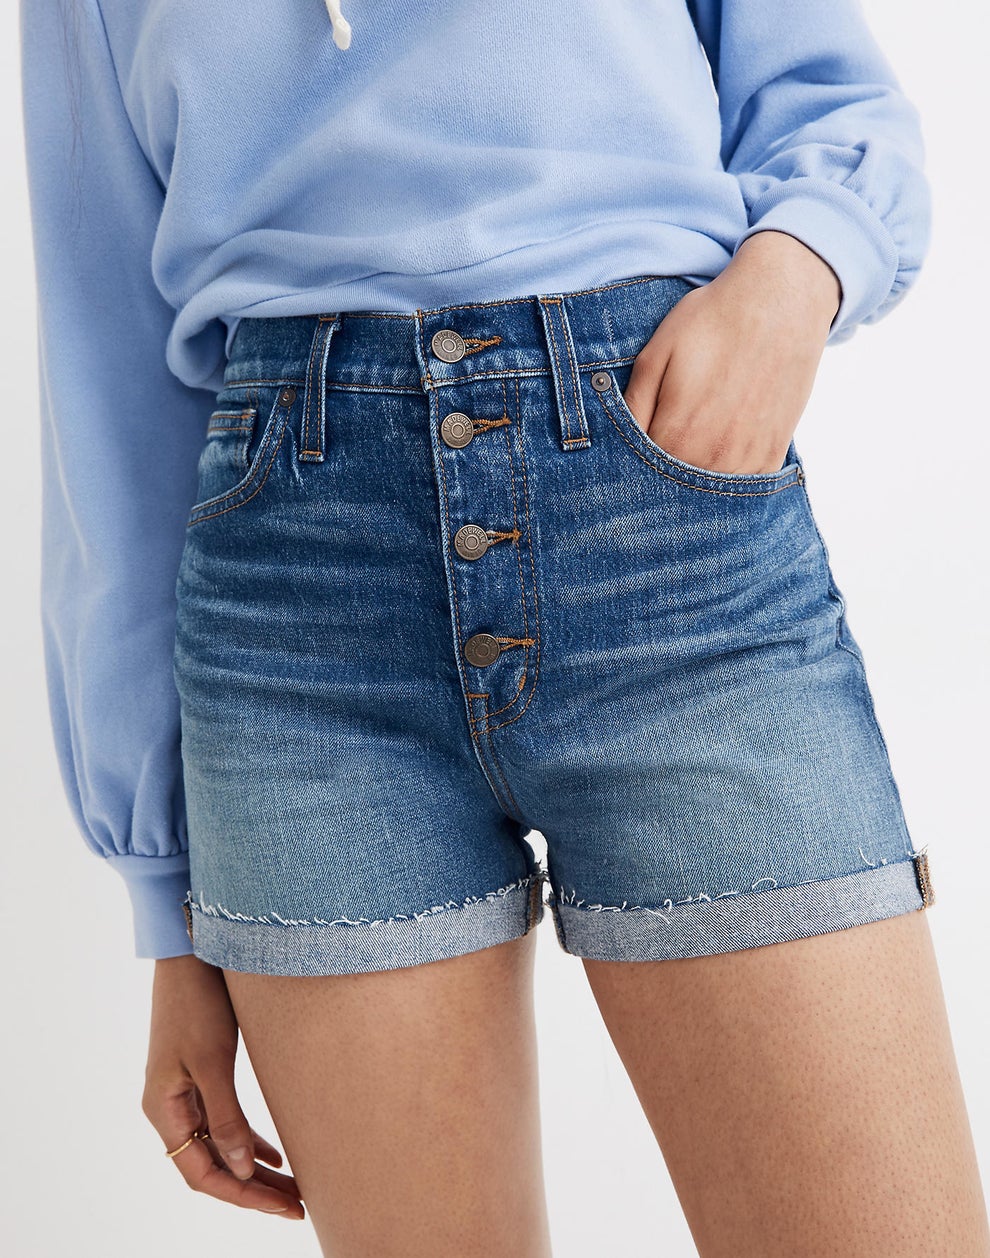 Madewell Is Having A Sale So The Time To Invest In Denim Is, Like ...